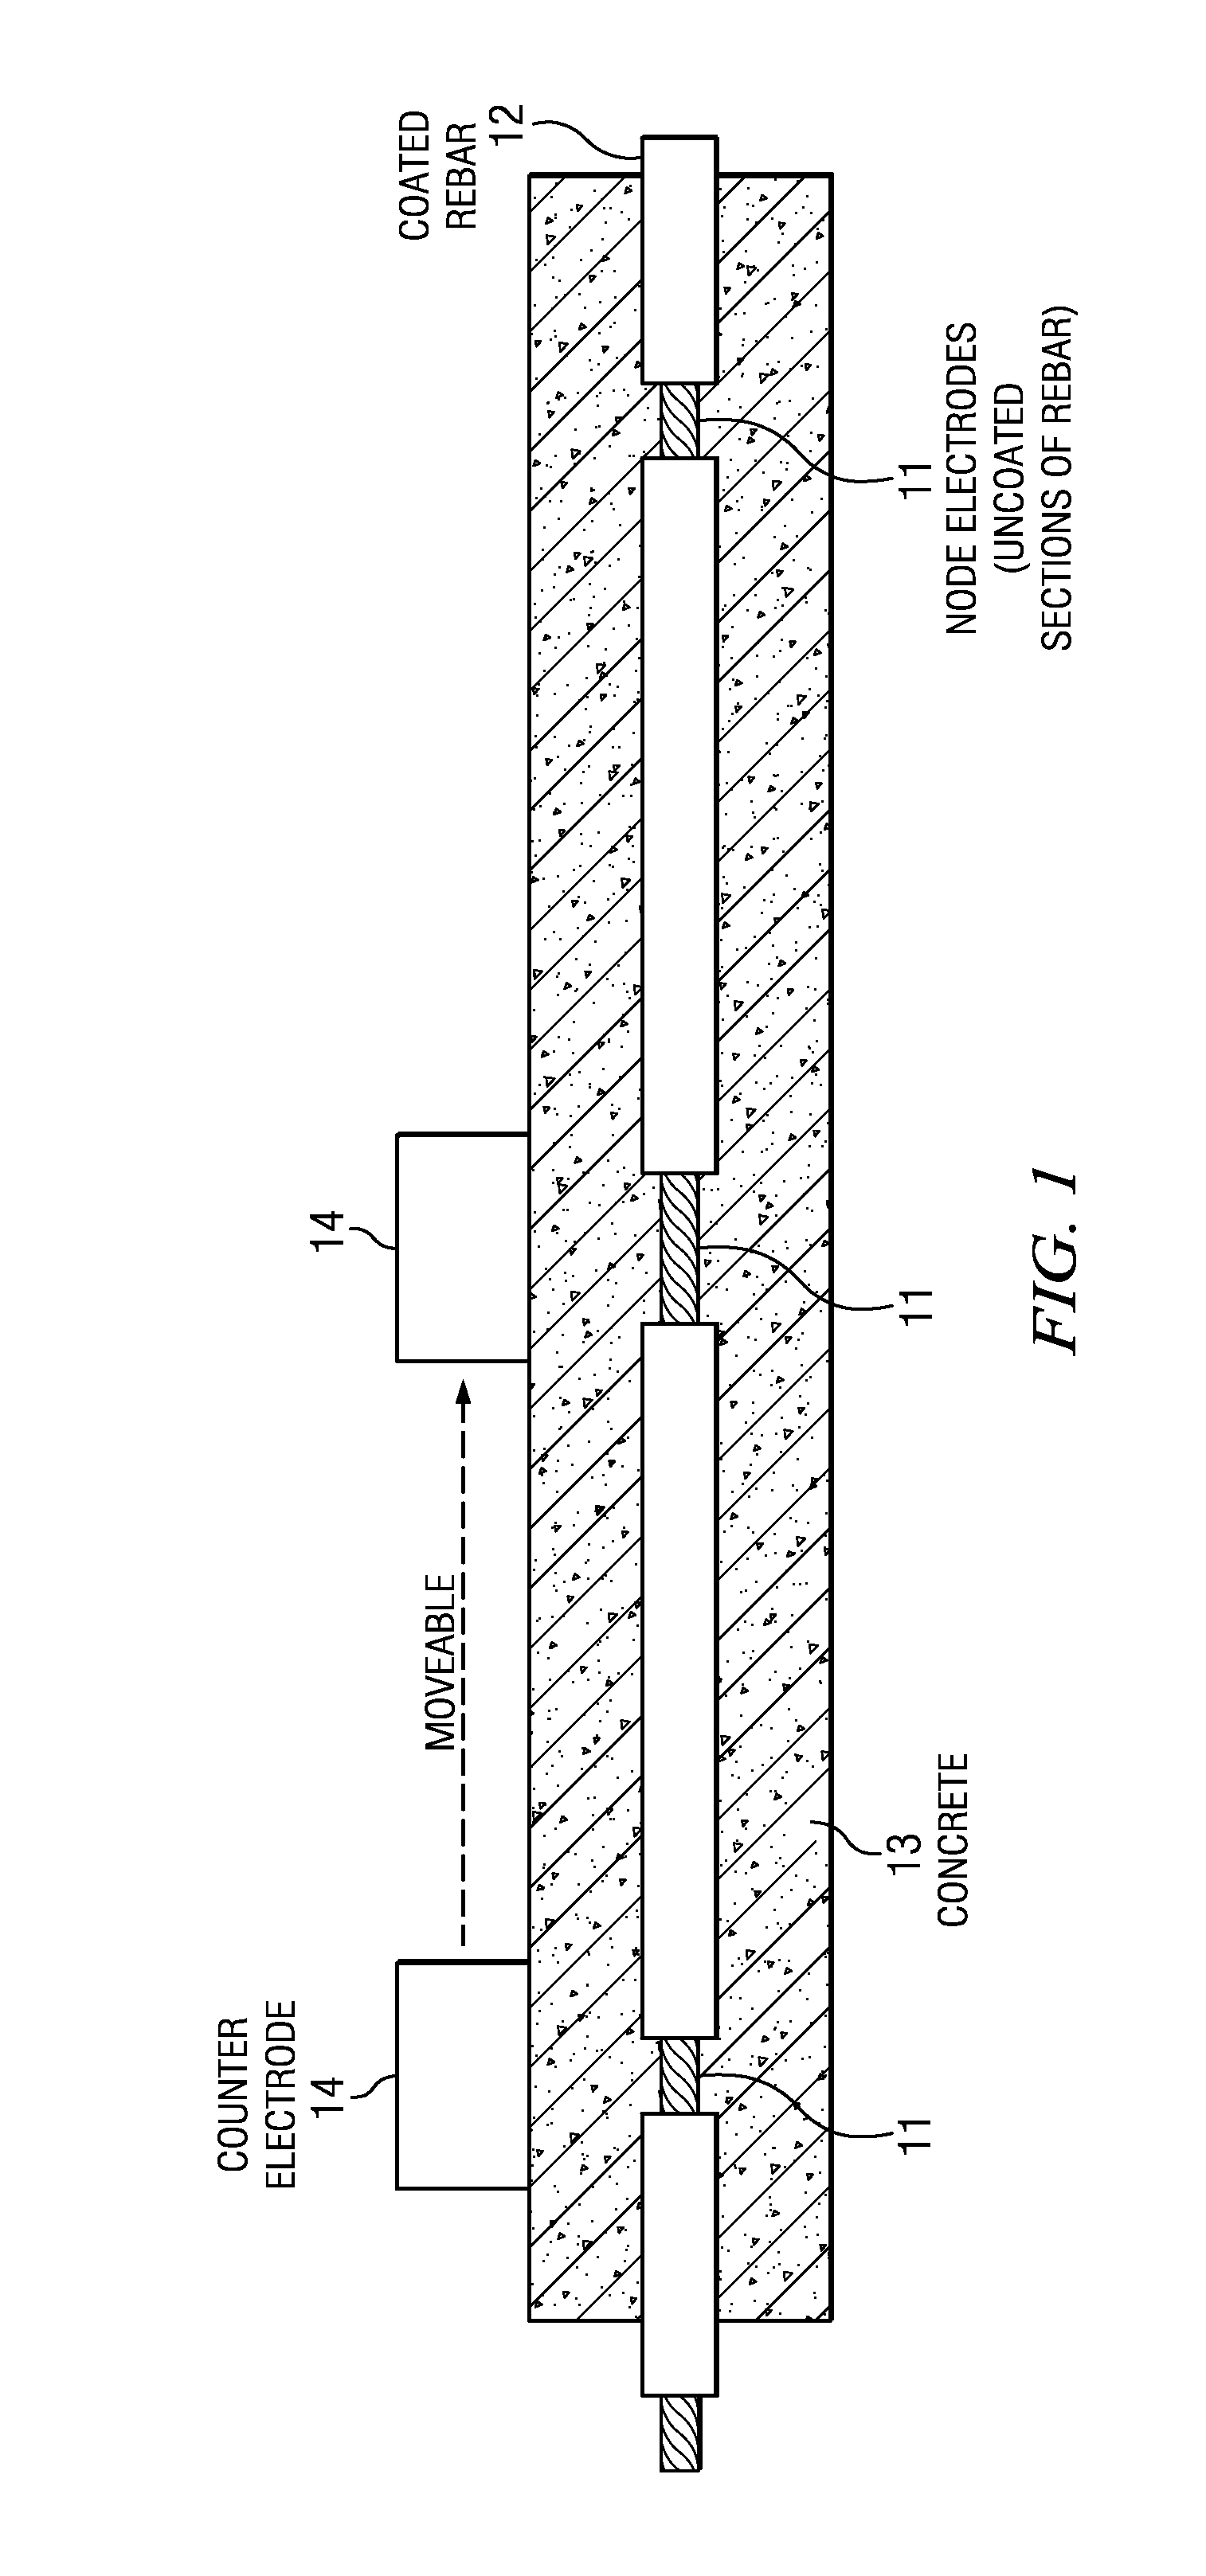 Corrosion Monitoring of Concrete Reinforcement Bars (Or Other Buried Corrodable Structures) Using Distributed Node Electrodes